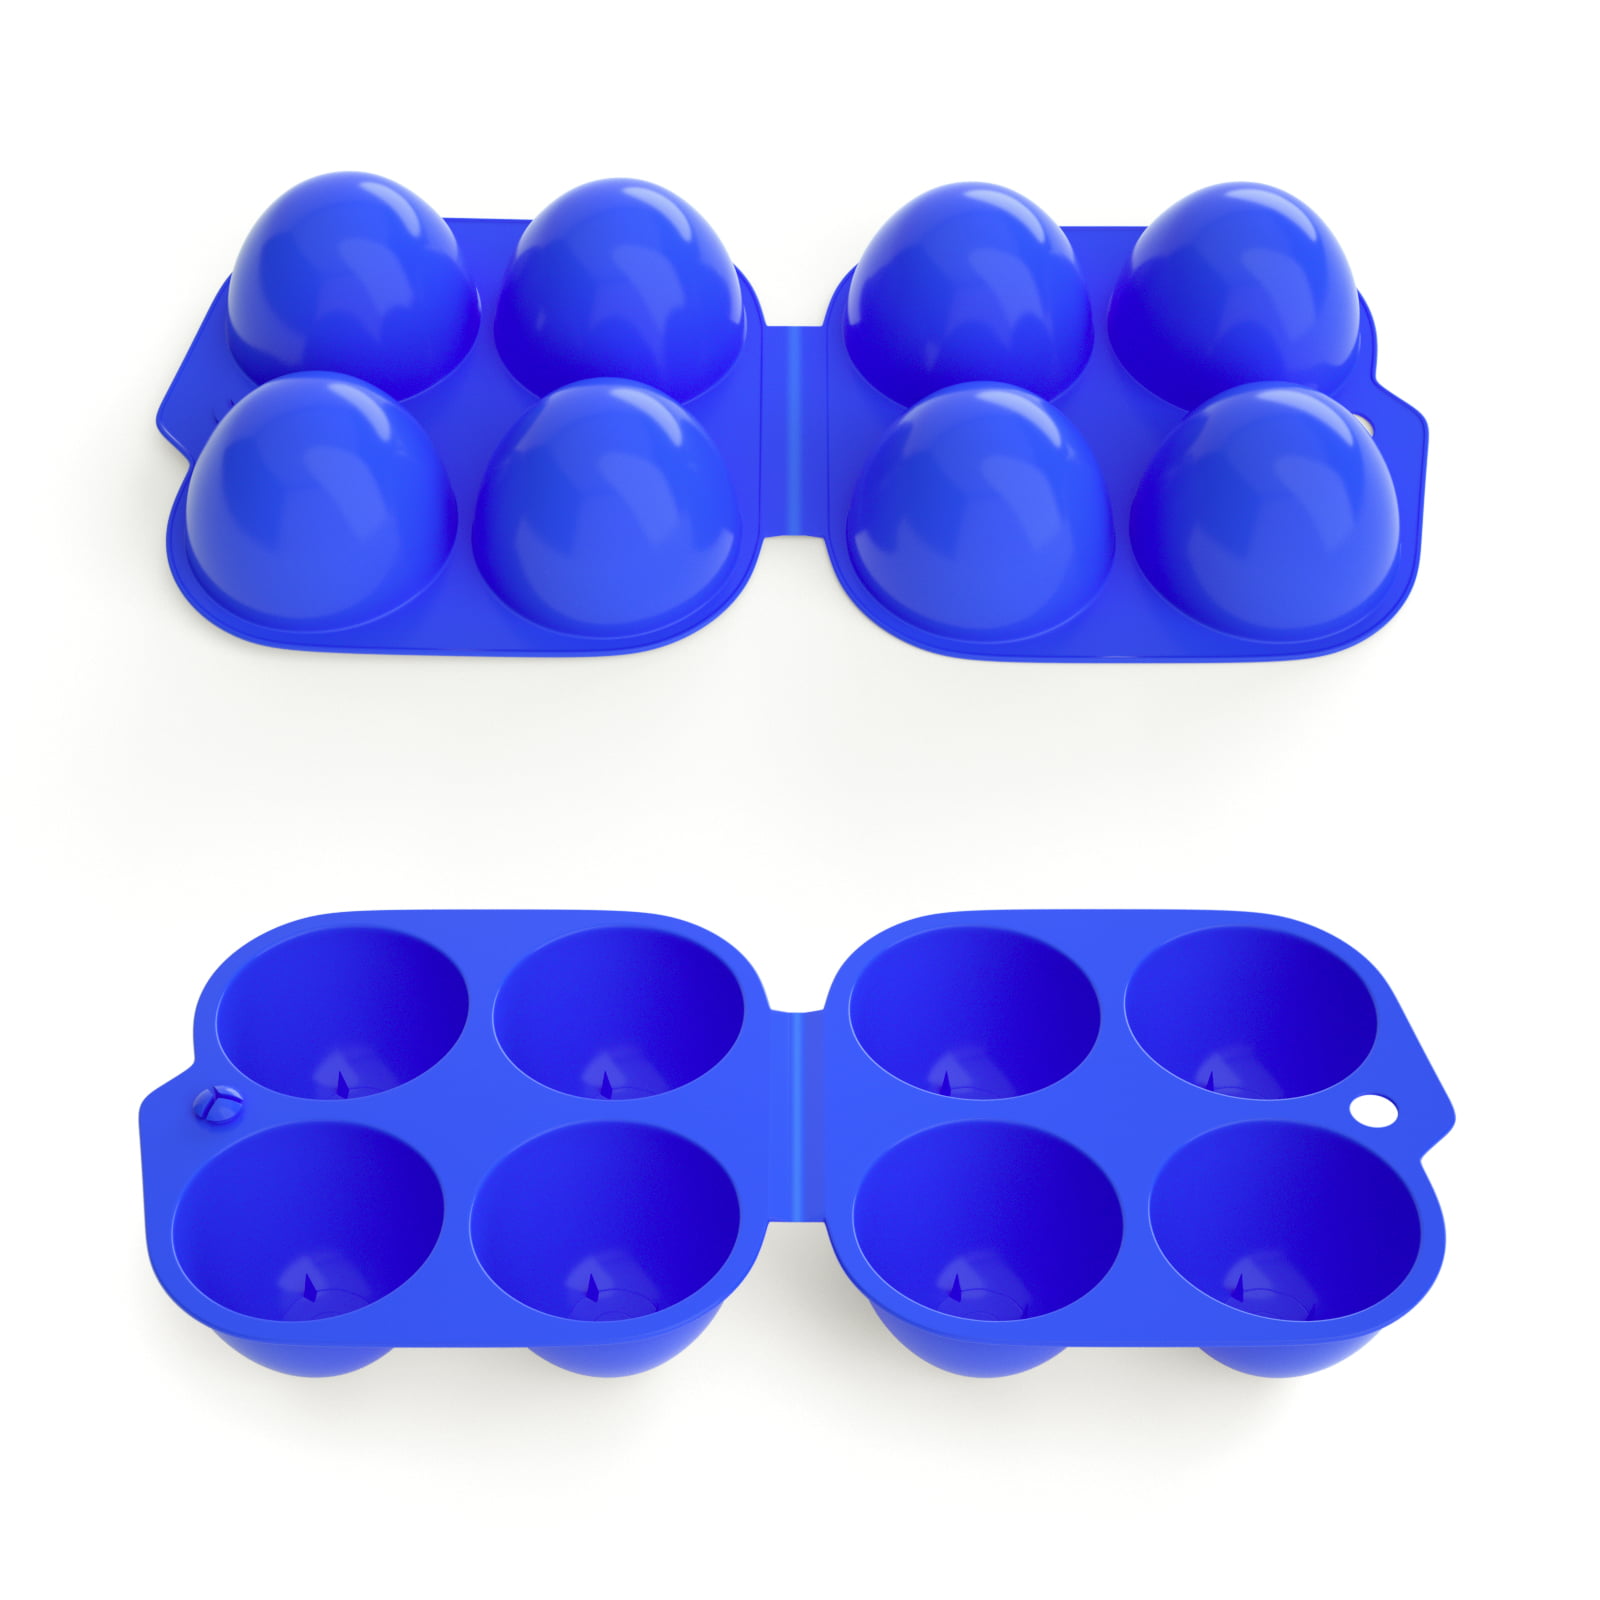 4 Eggs Plastic Egg Tray ABS Portable Outdoor Camping Picnic BBQ ShockProof Egg Holder Container Storage Box